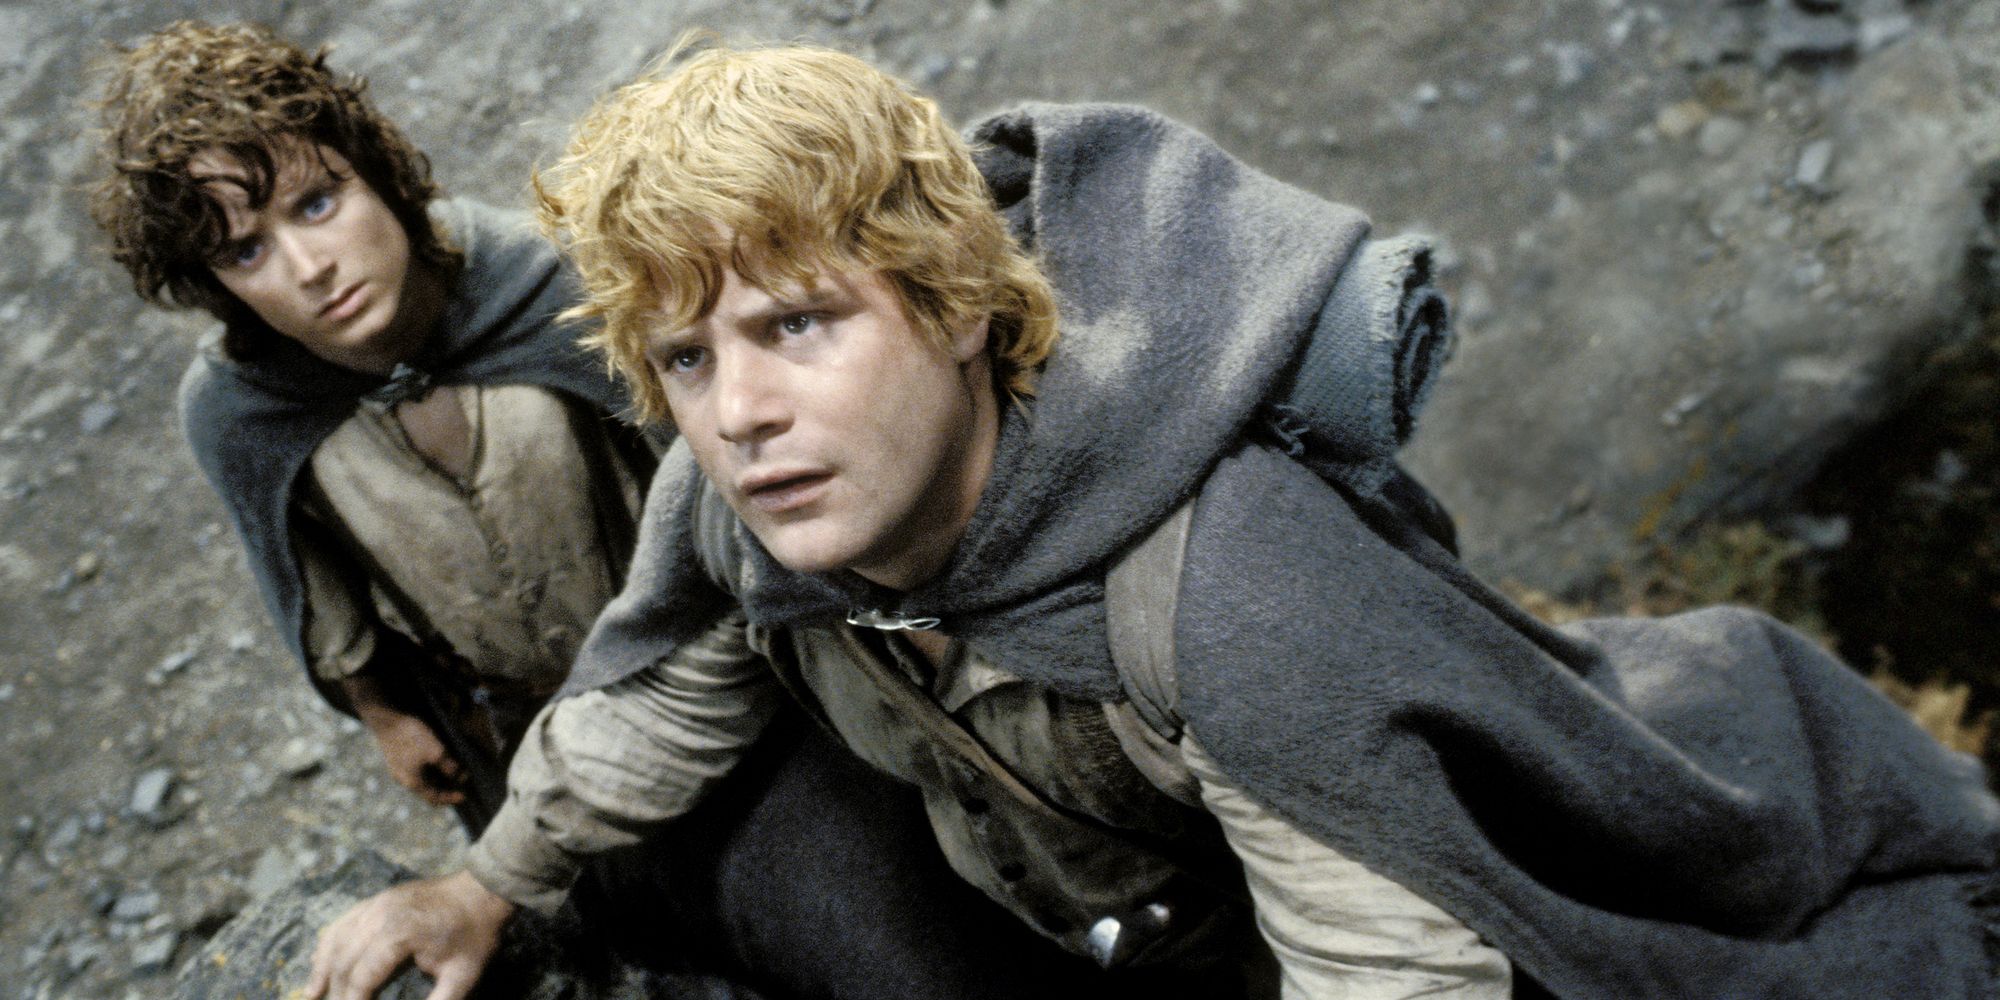 The Lord Of The Rings: Return Of The King (2003) Sam & Frodo